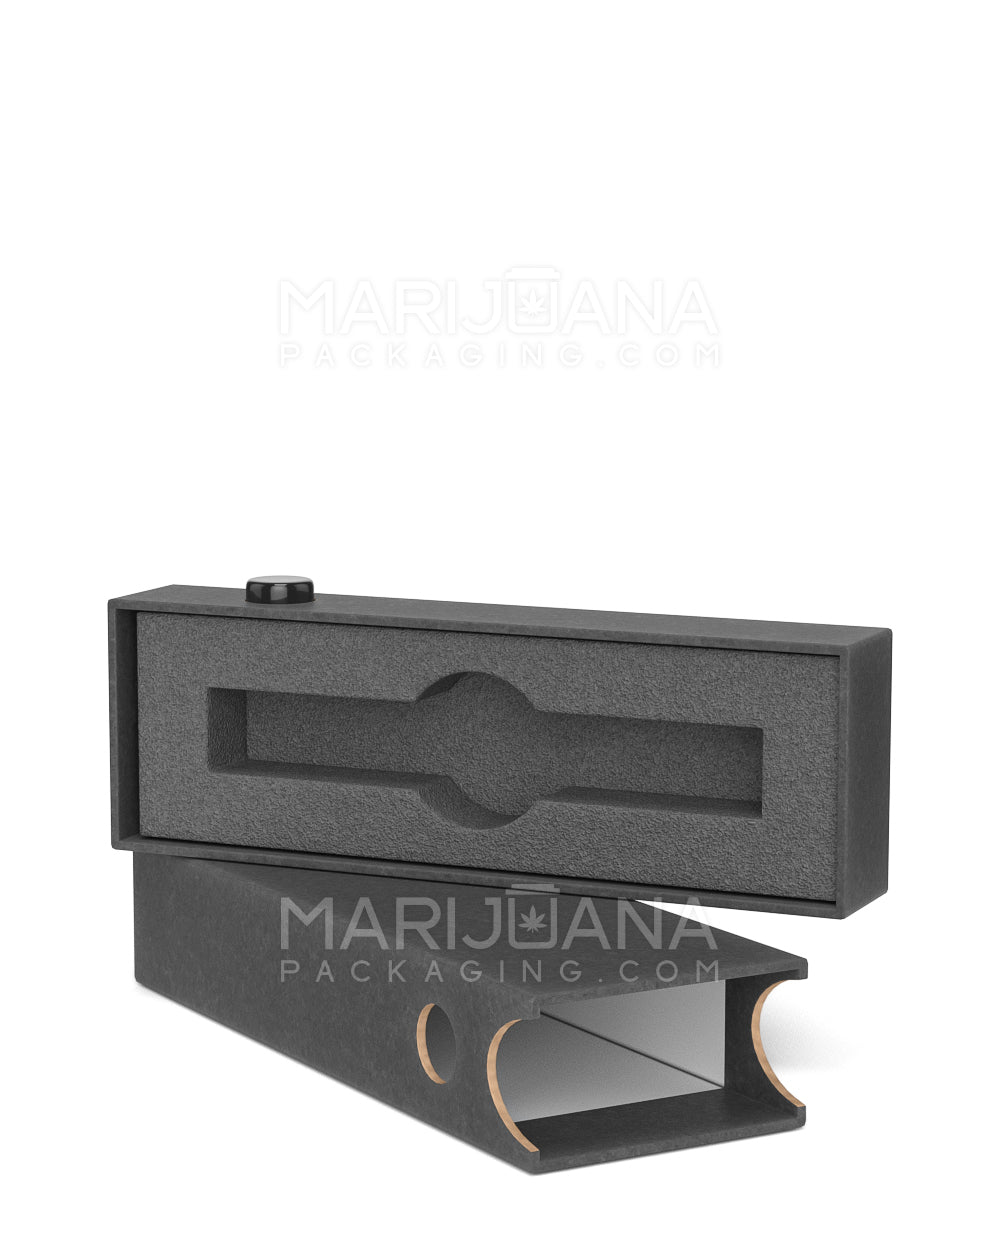 Child Resistant & Sustainable | 100% Recyclable Slim Cardboard Vape Cartridge Box w/ Press Button & Foam Insert | 100mm - Black - 100 Count